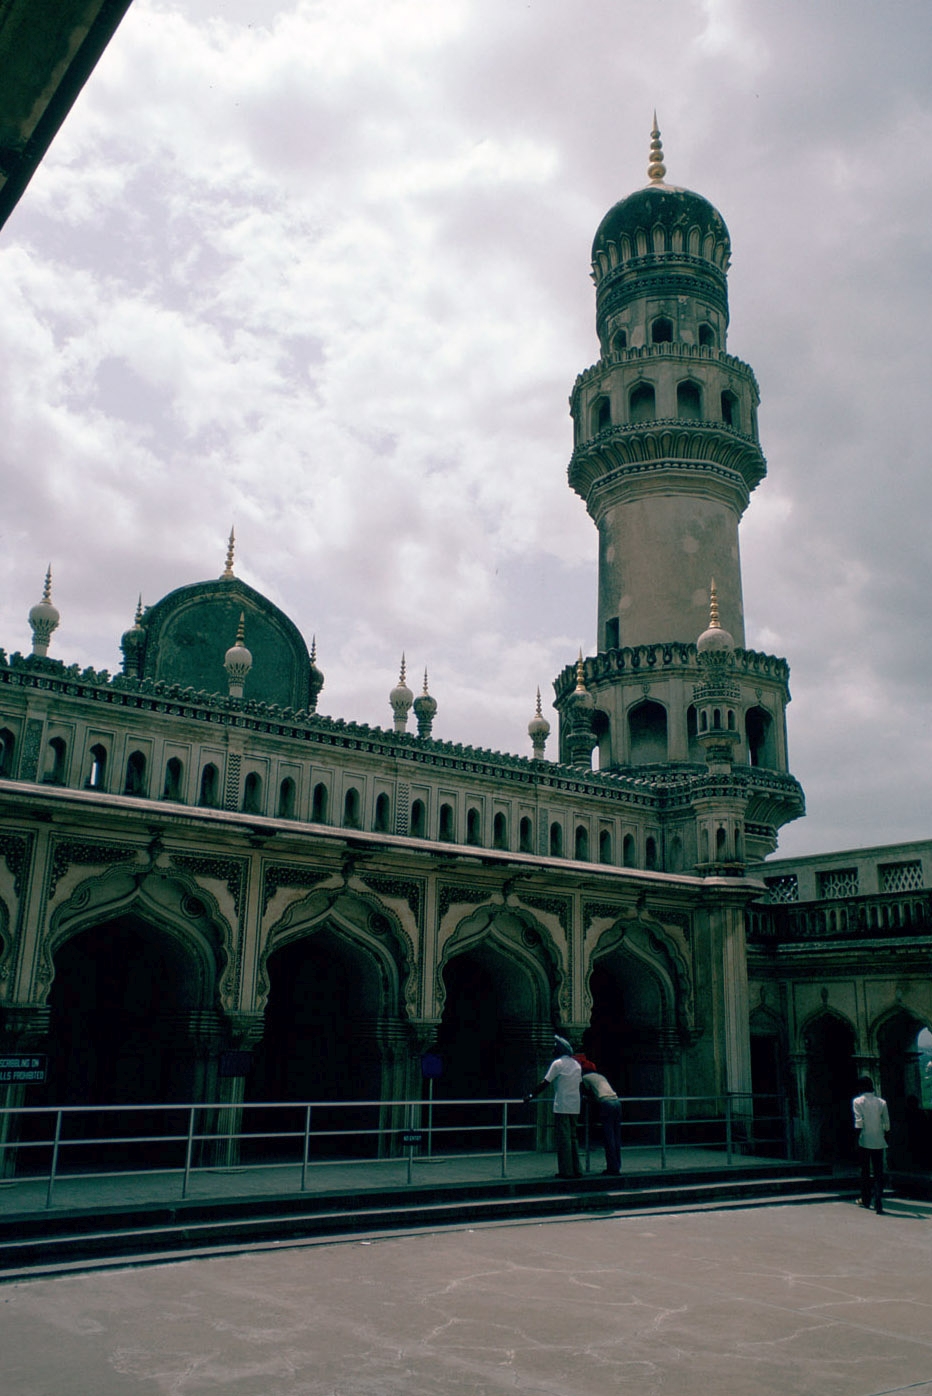 Char Minar - General view of the mosque on the upper level